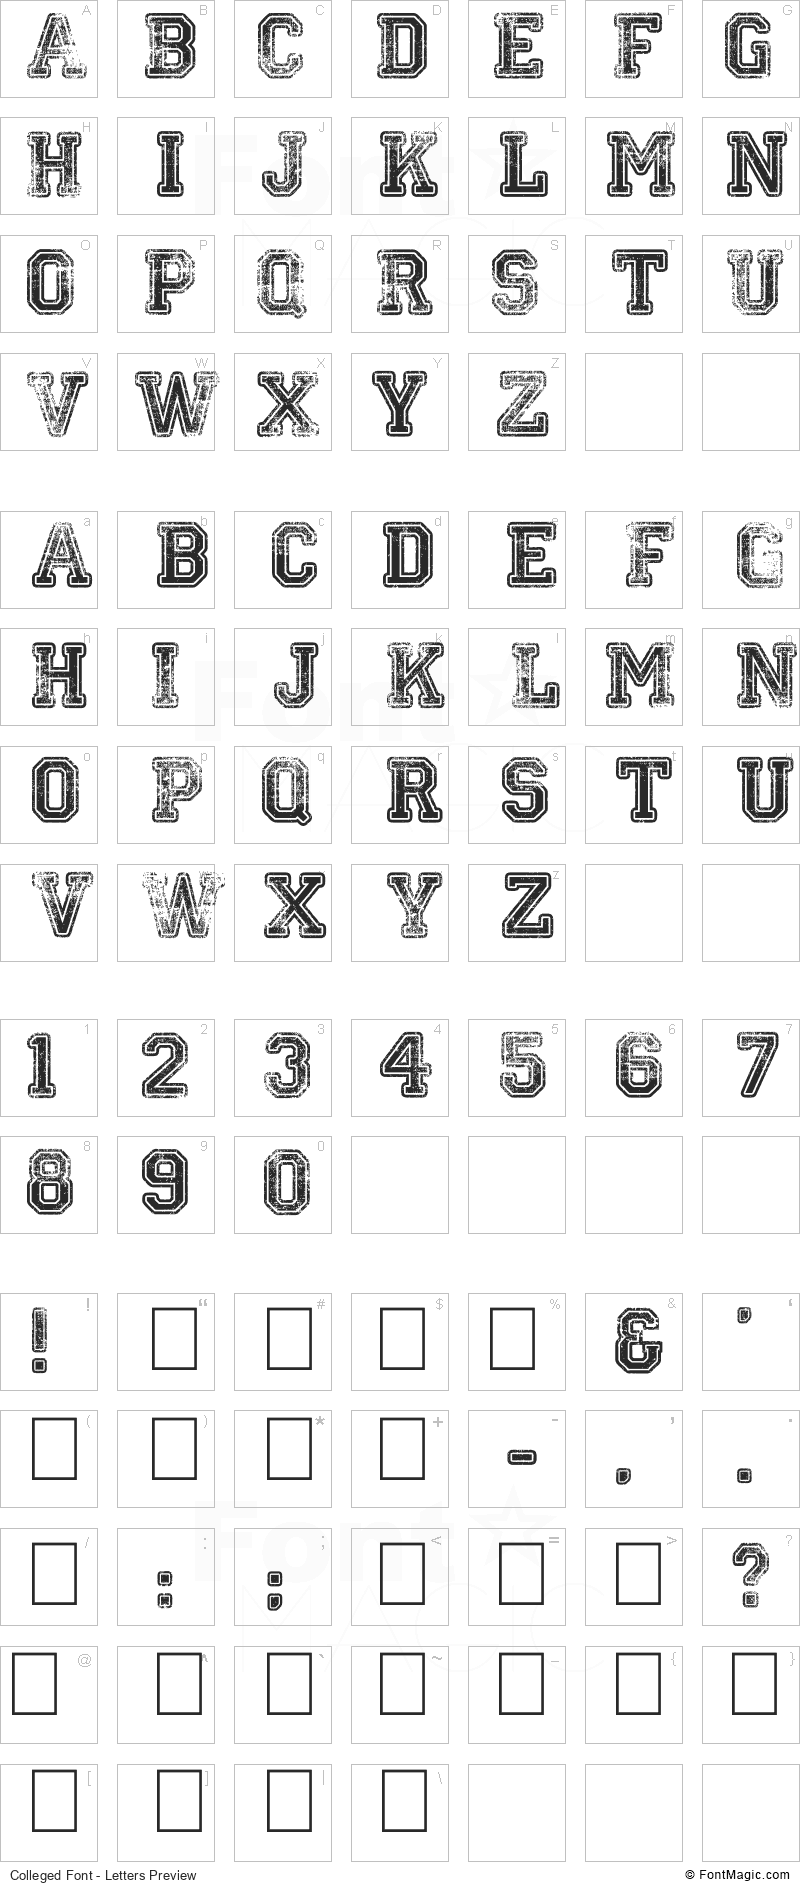 Colleged Font - All Latters Preview Chart